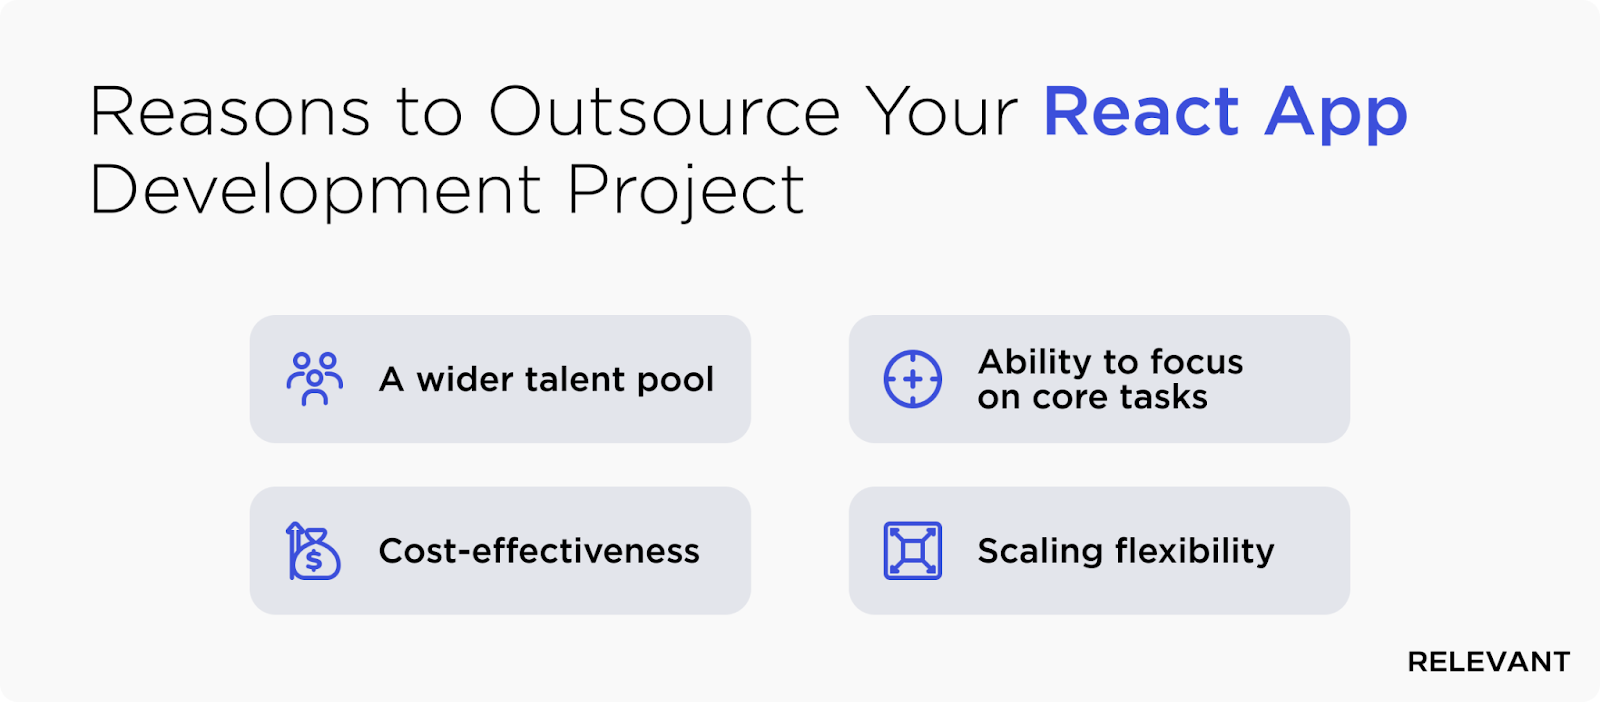 Reasons to outsource your React app development